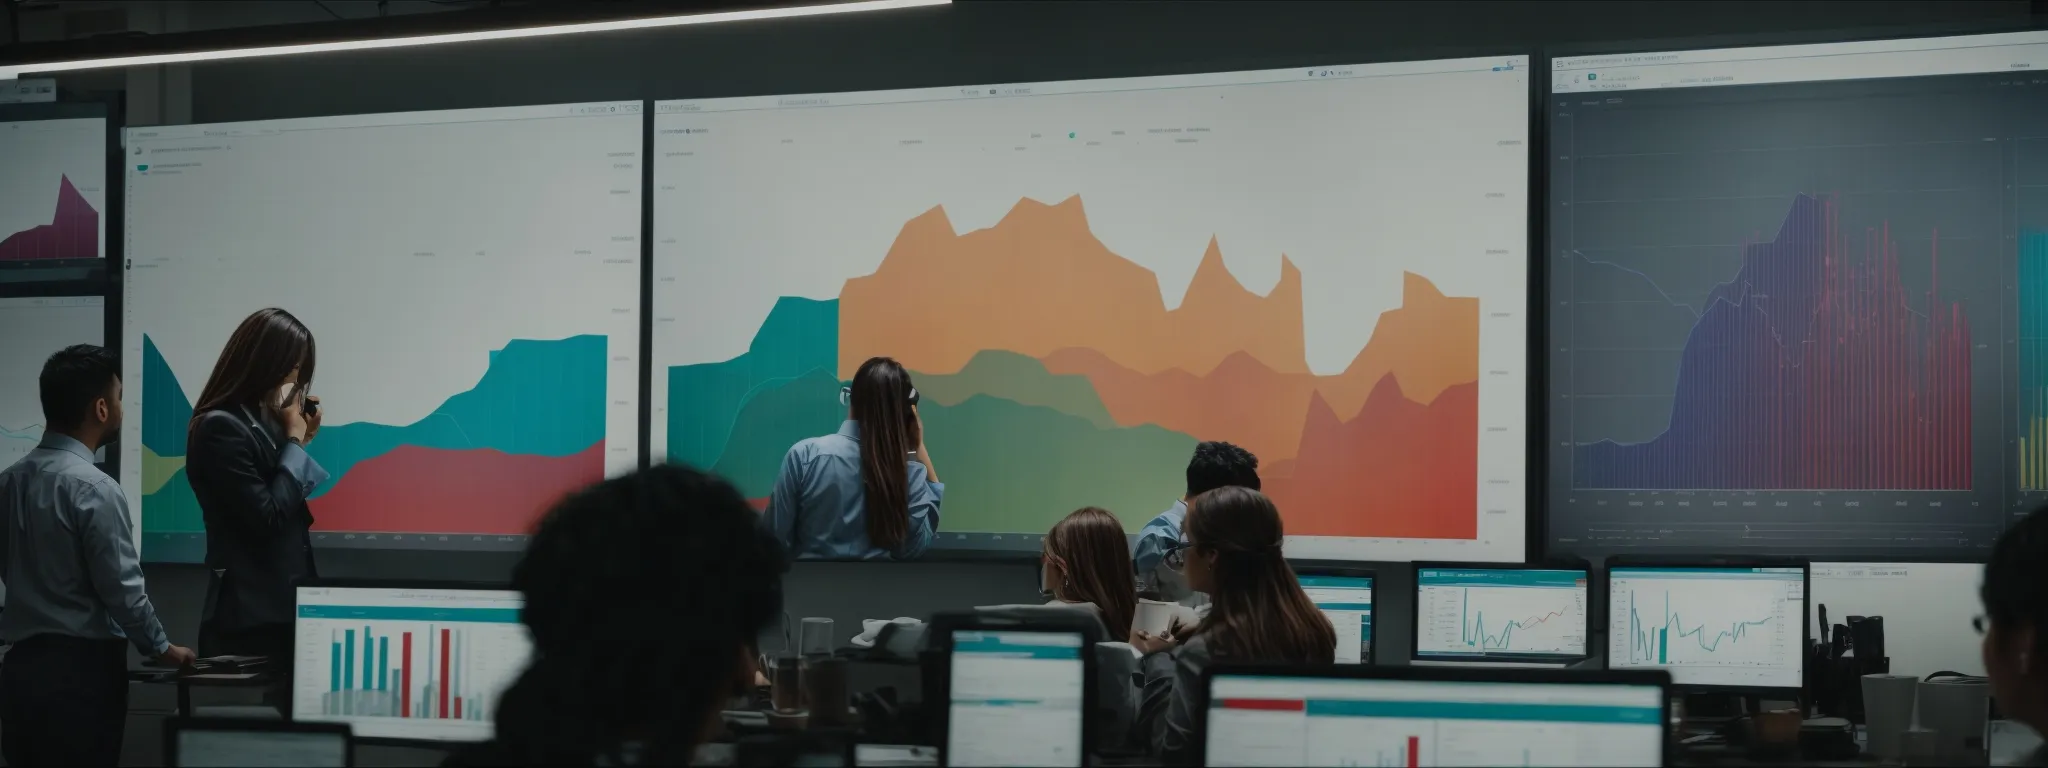 a professional in an office points to a large screen displaying colorful charts and graphs while colleagues observe.